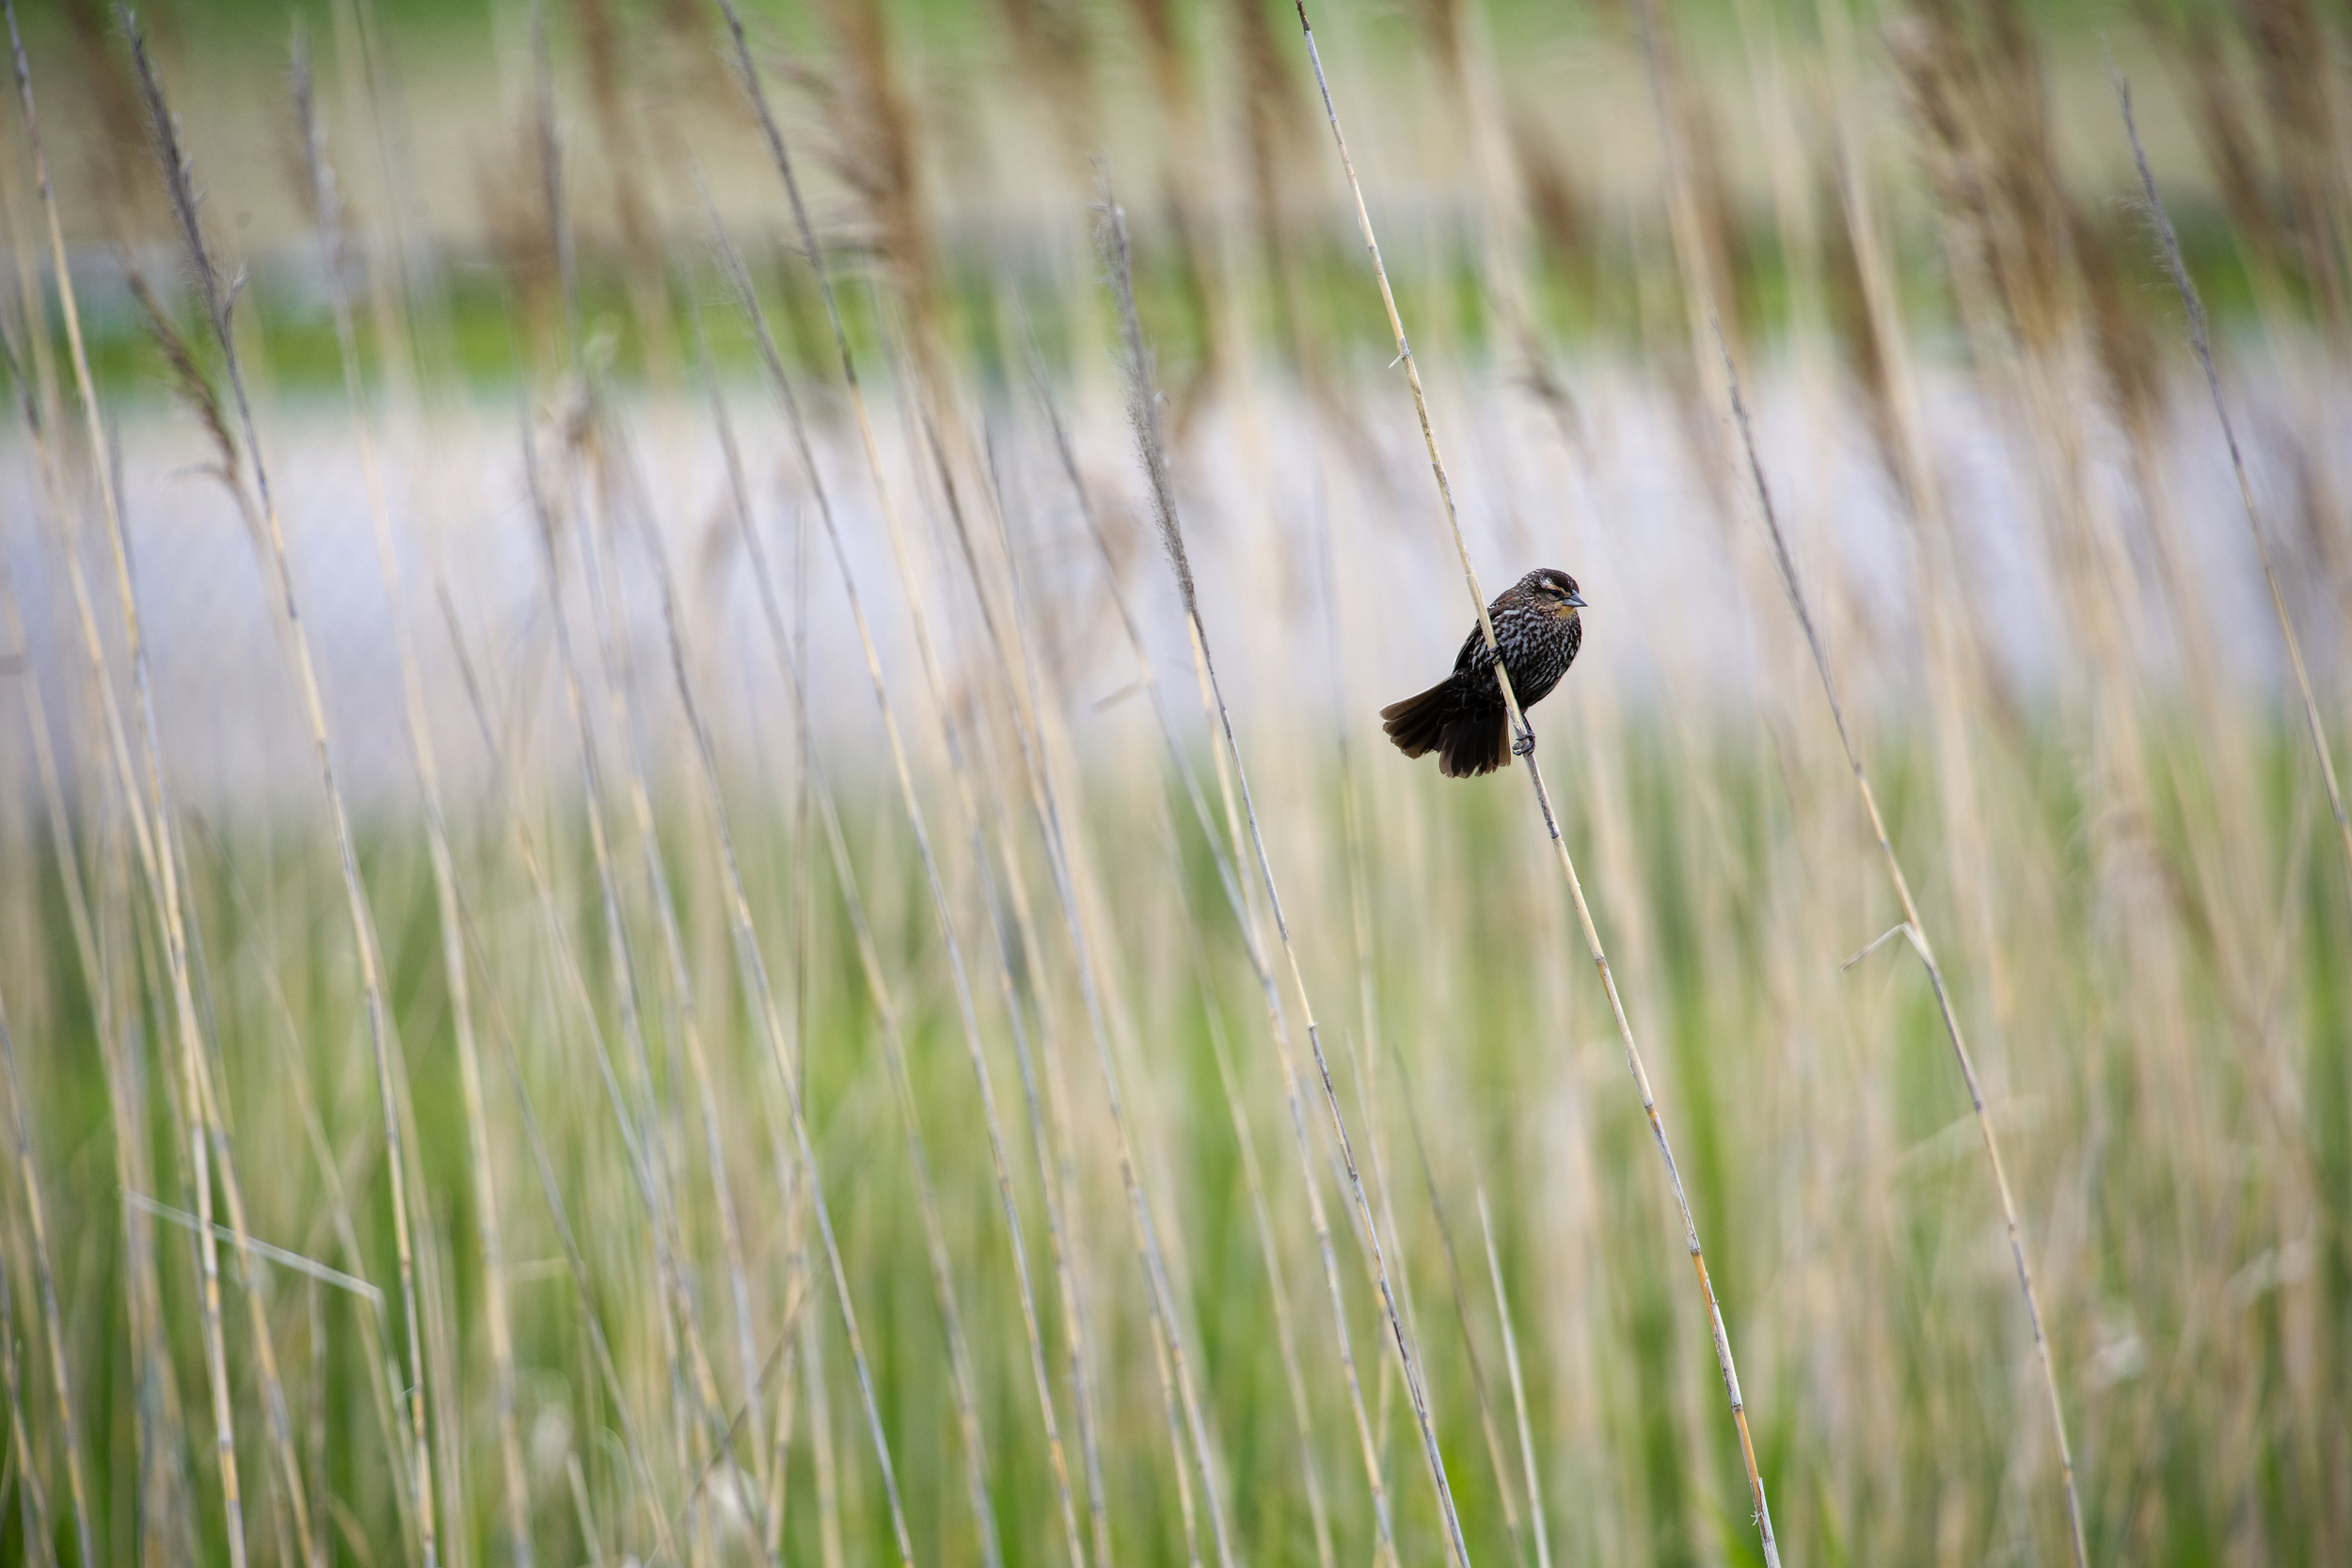  A brown sparrow hangs on during a windy day in London, Ontario.  June 1, 2015 